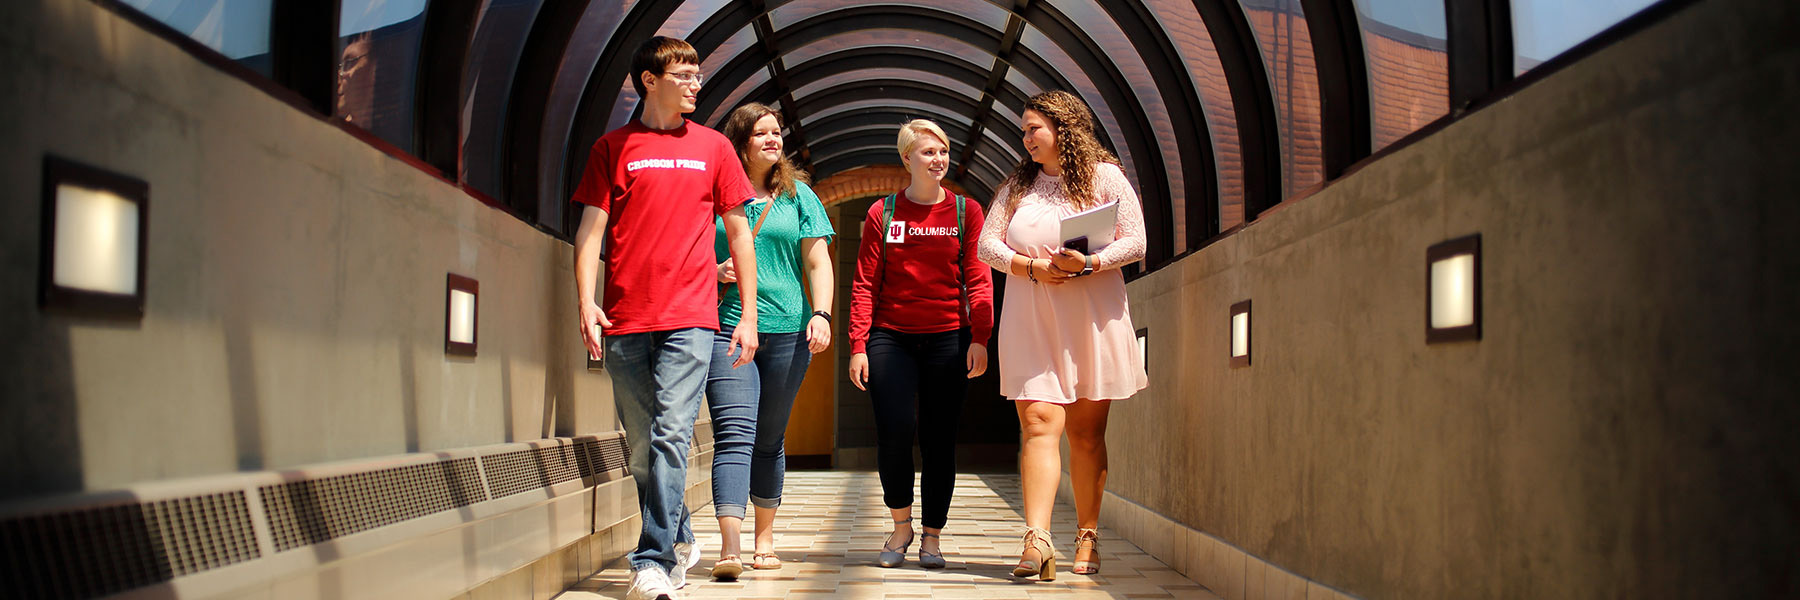 Photo of students walking in the tunnel.